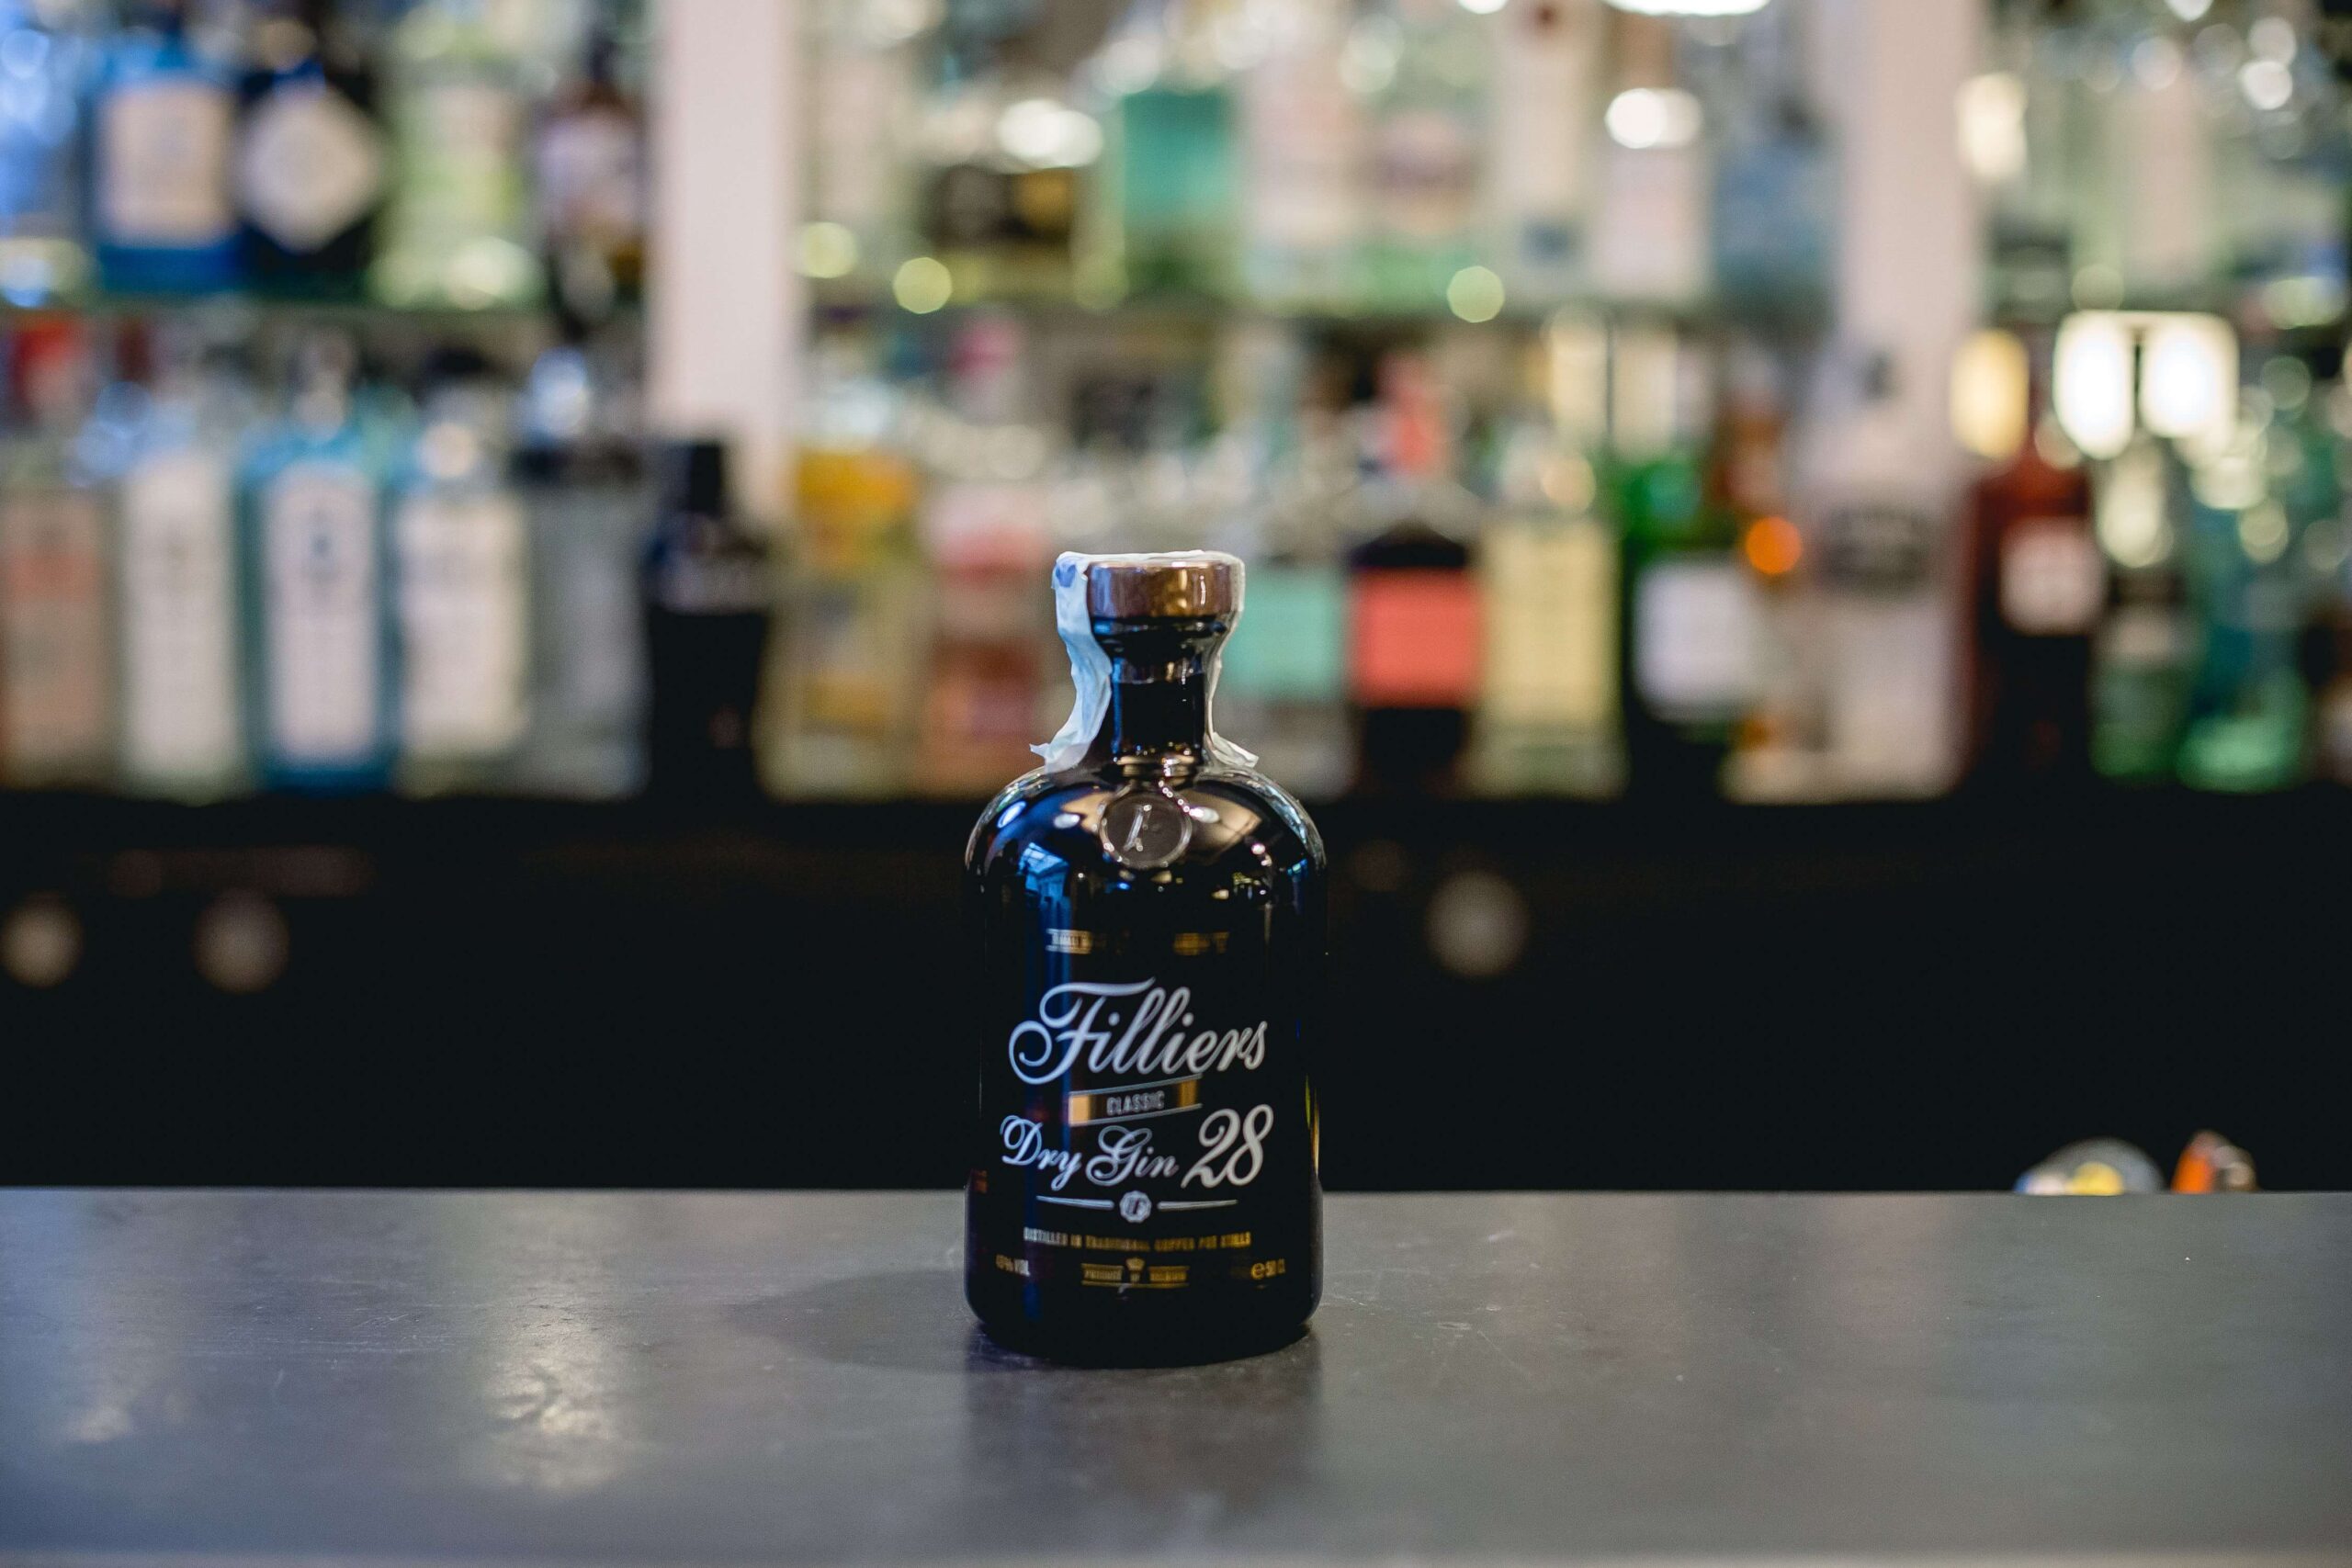 filliers dry gin 28 classic